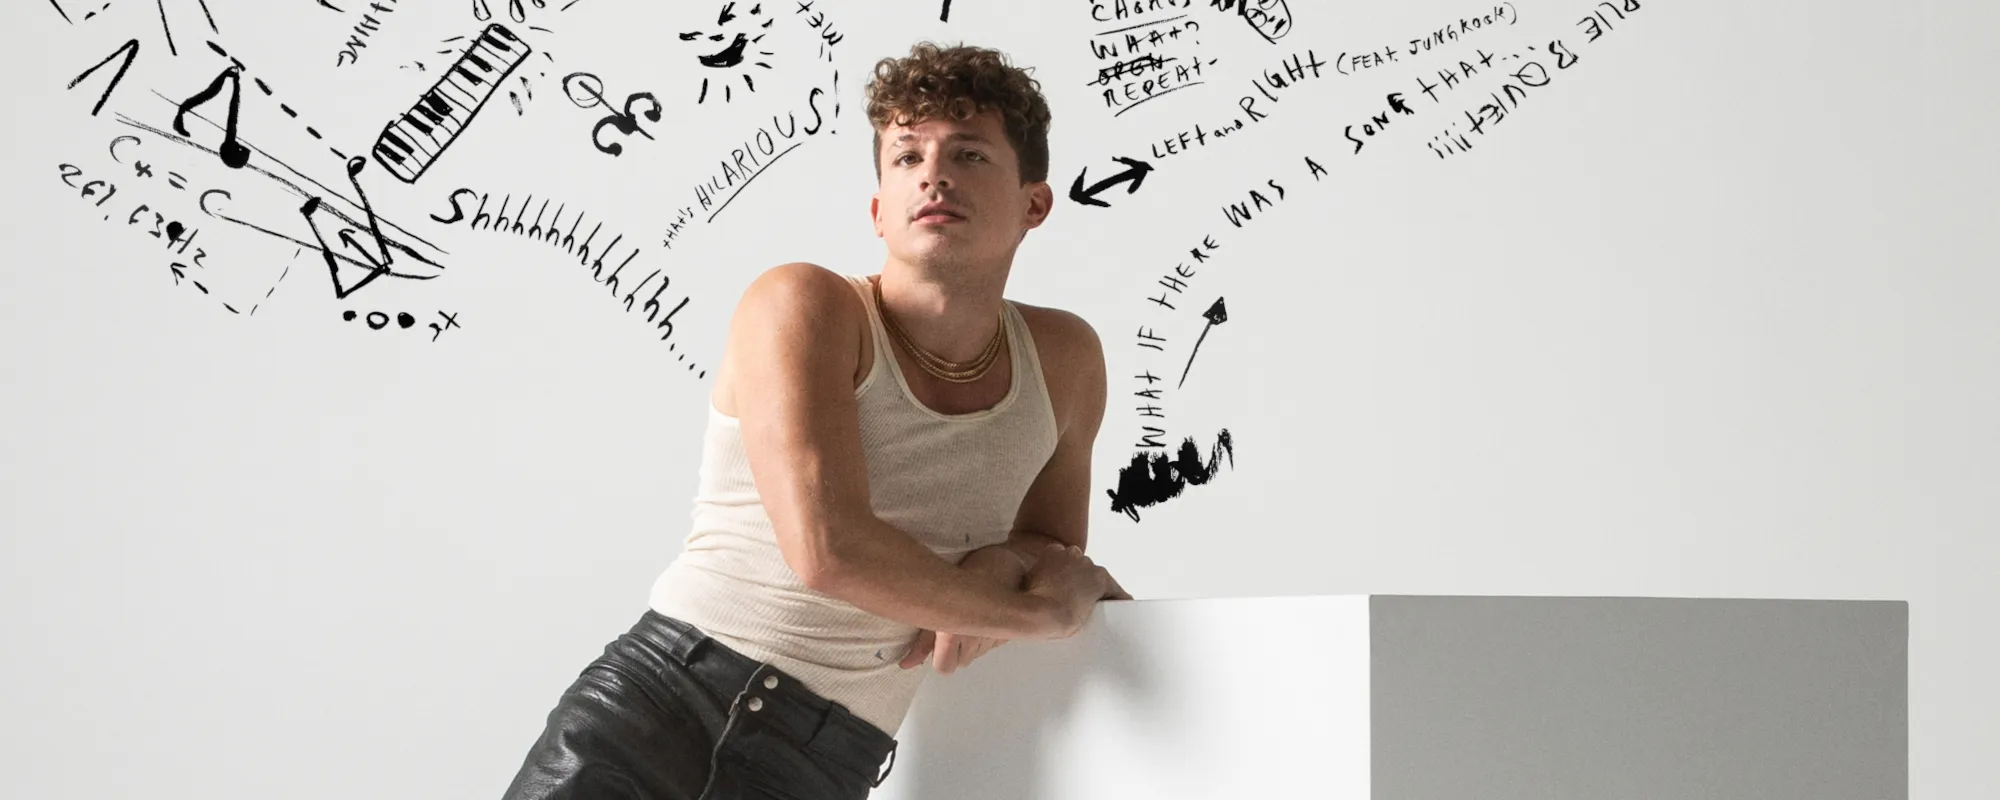 Charlie Puth Unveils New Album Cover and Release Date for Third Record, ‘Charlie’